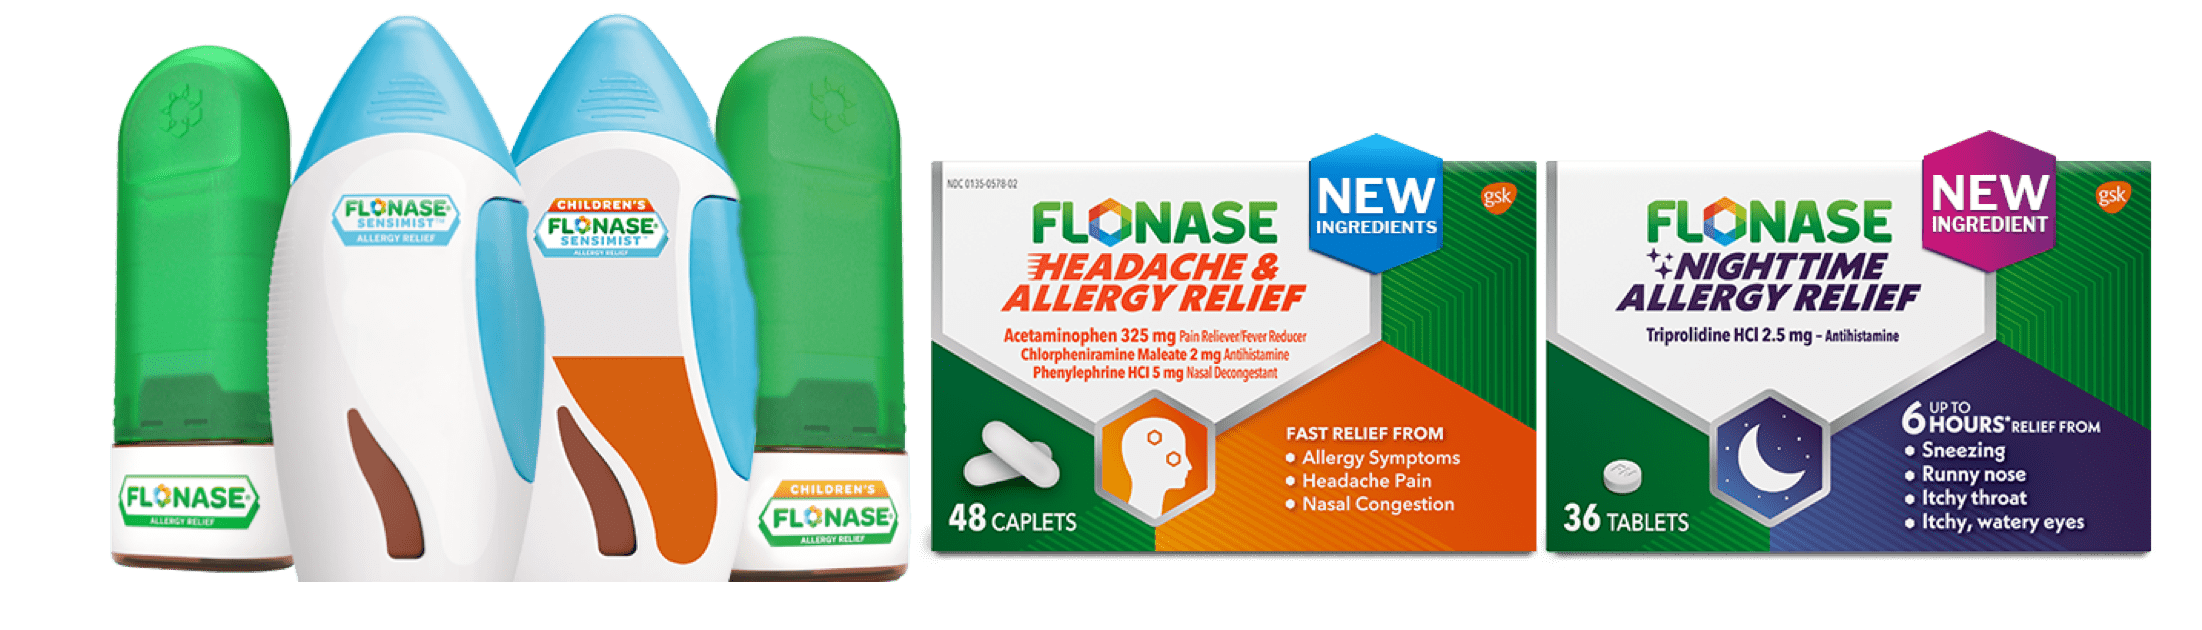 FLONASE allergy relief products for adults and children new